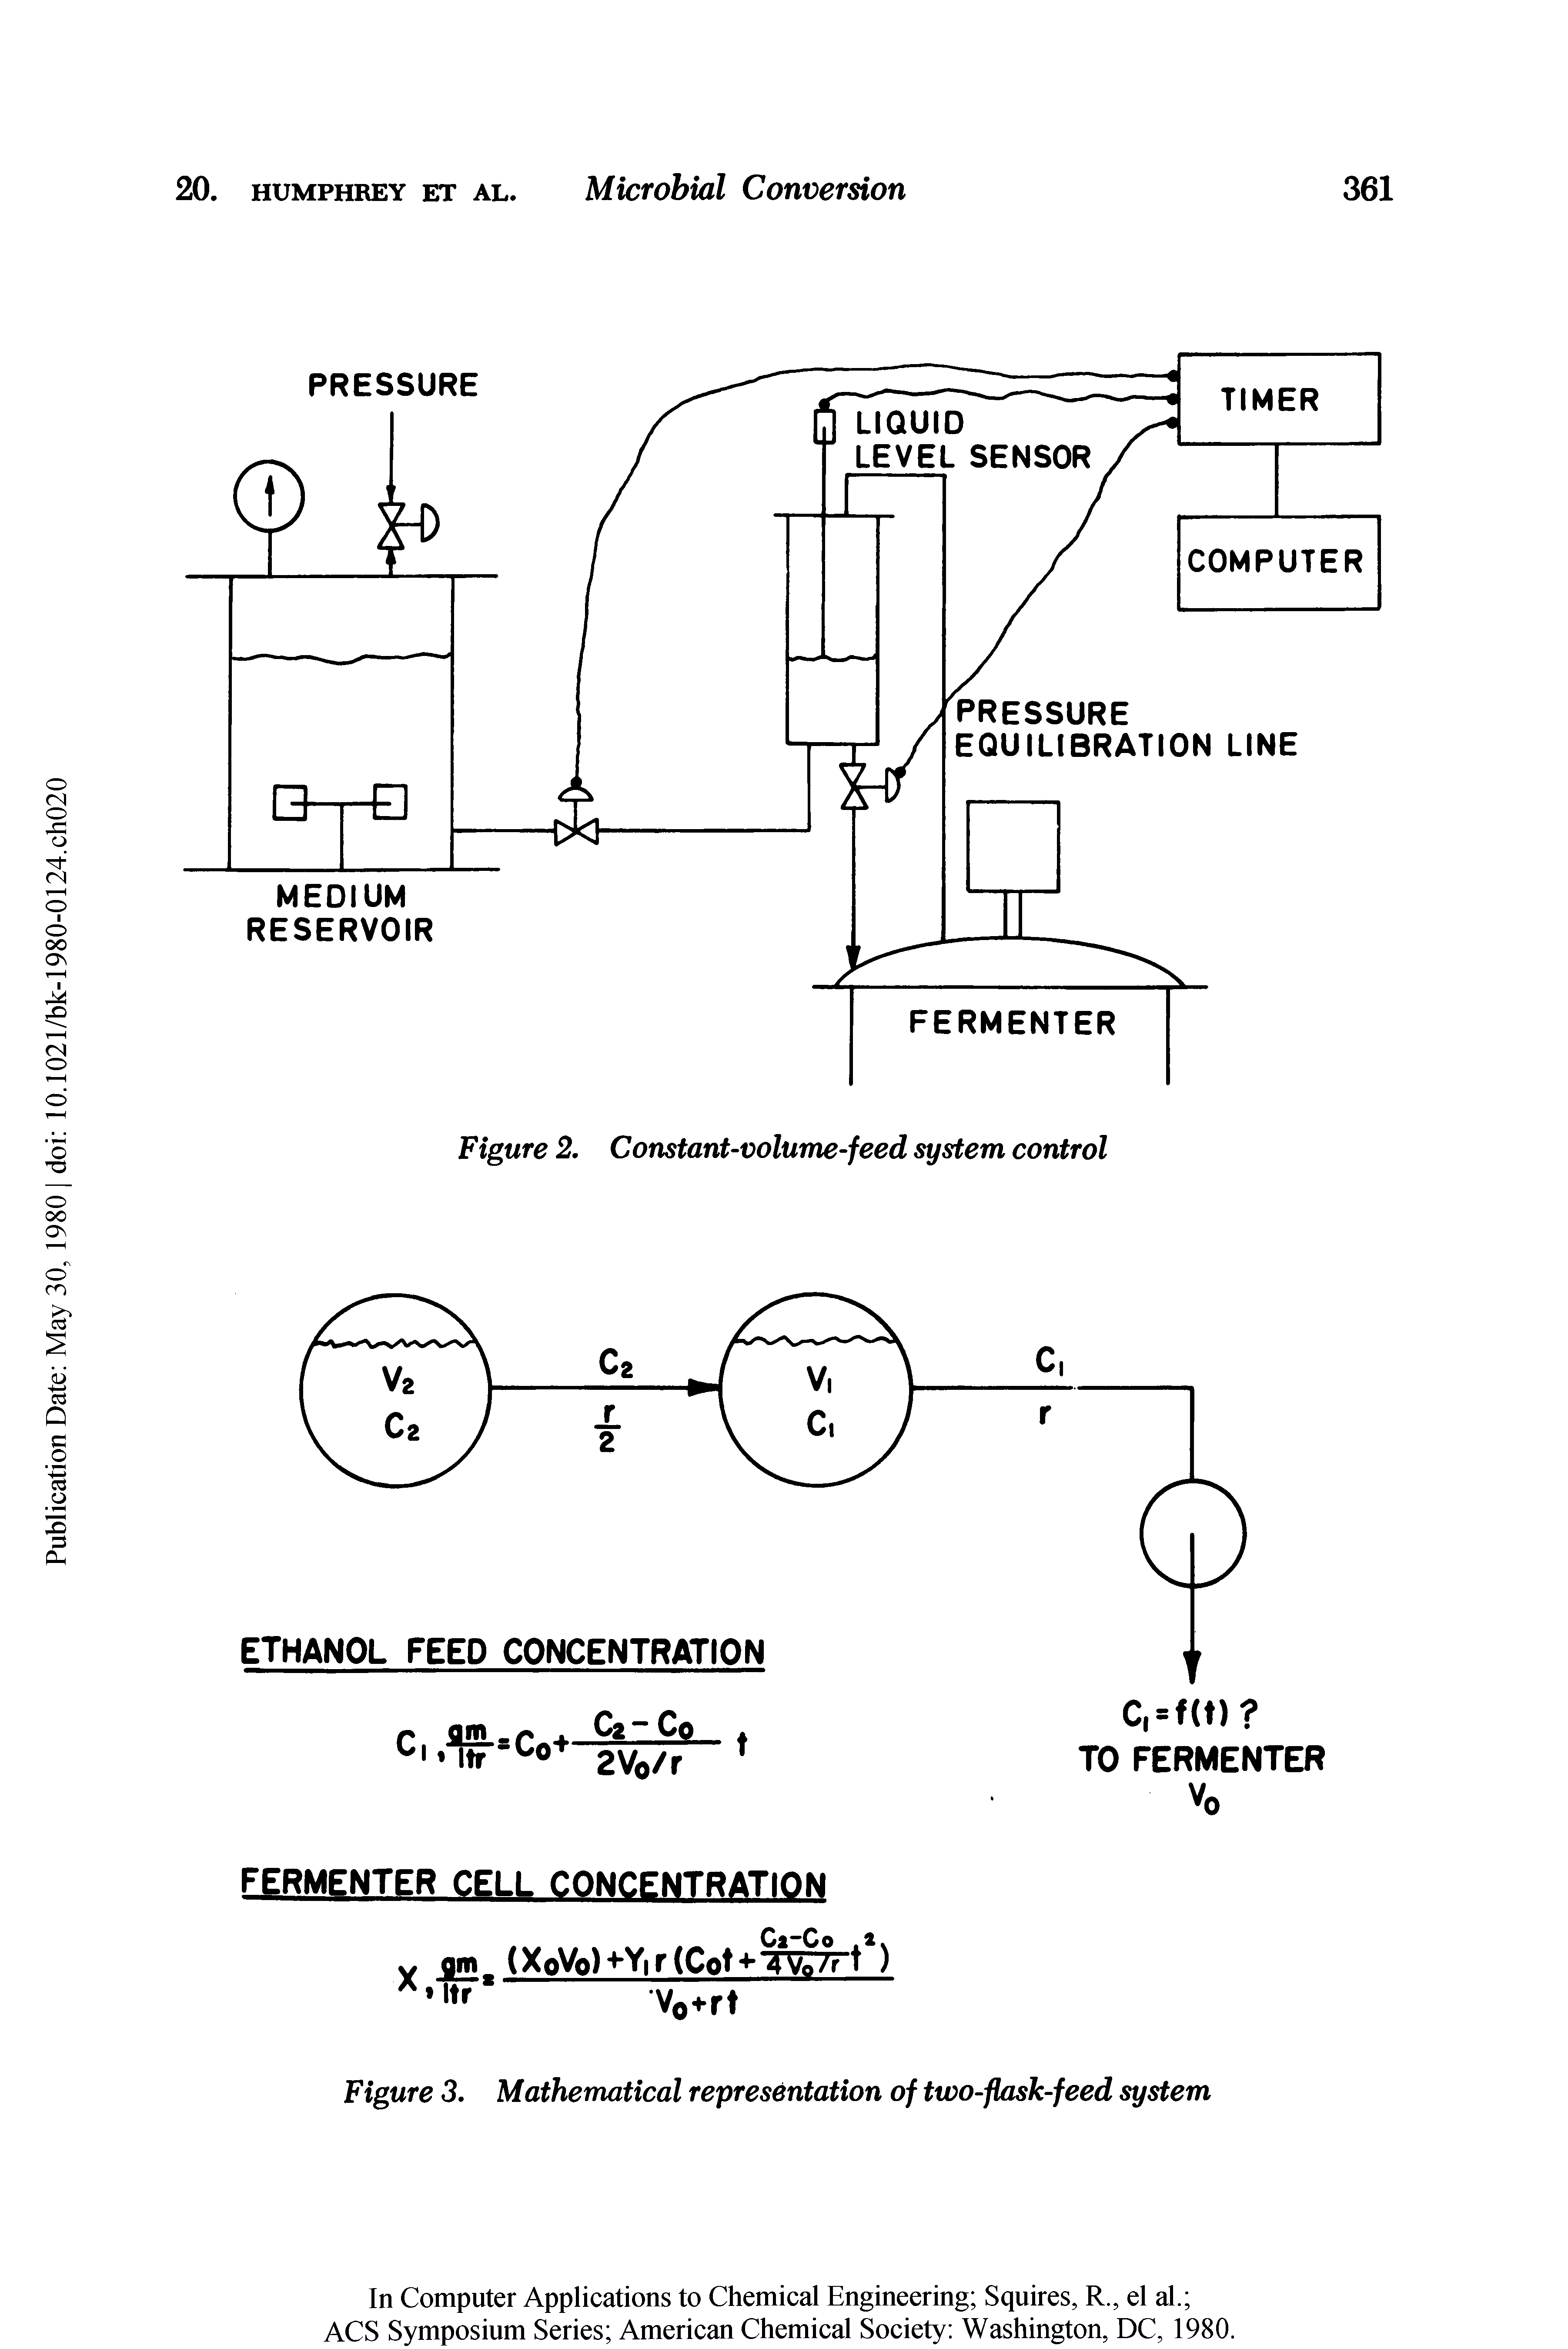 Figure 2. Constant-volume-feed system control...